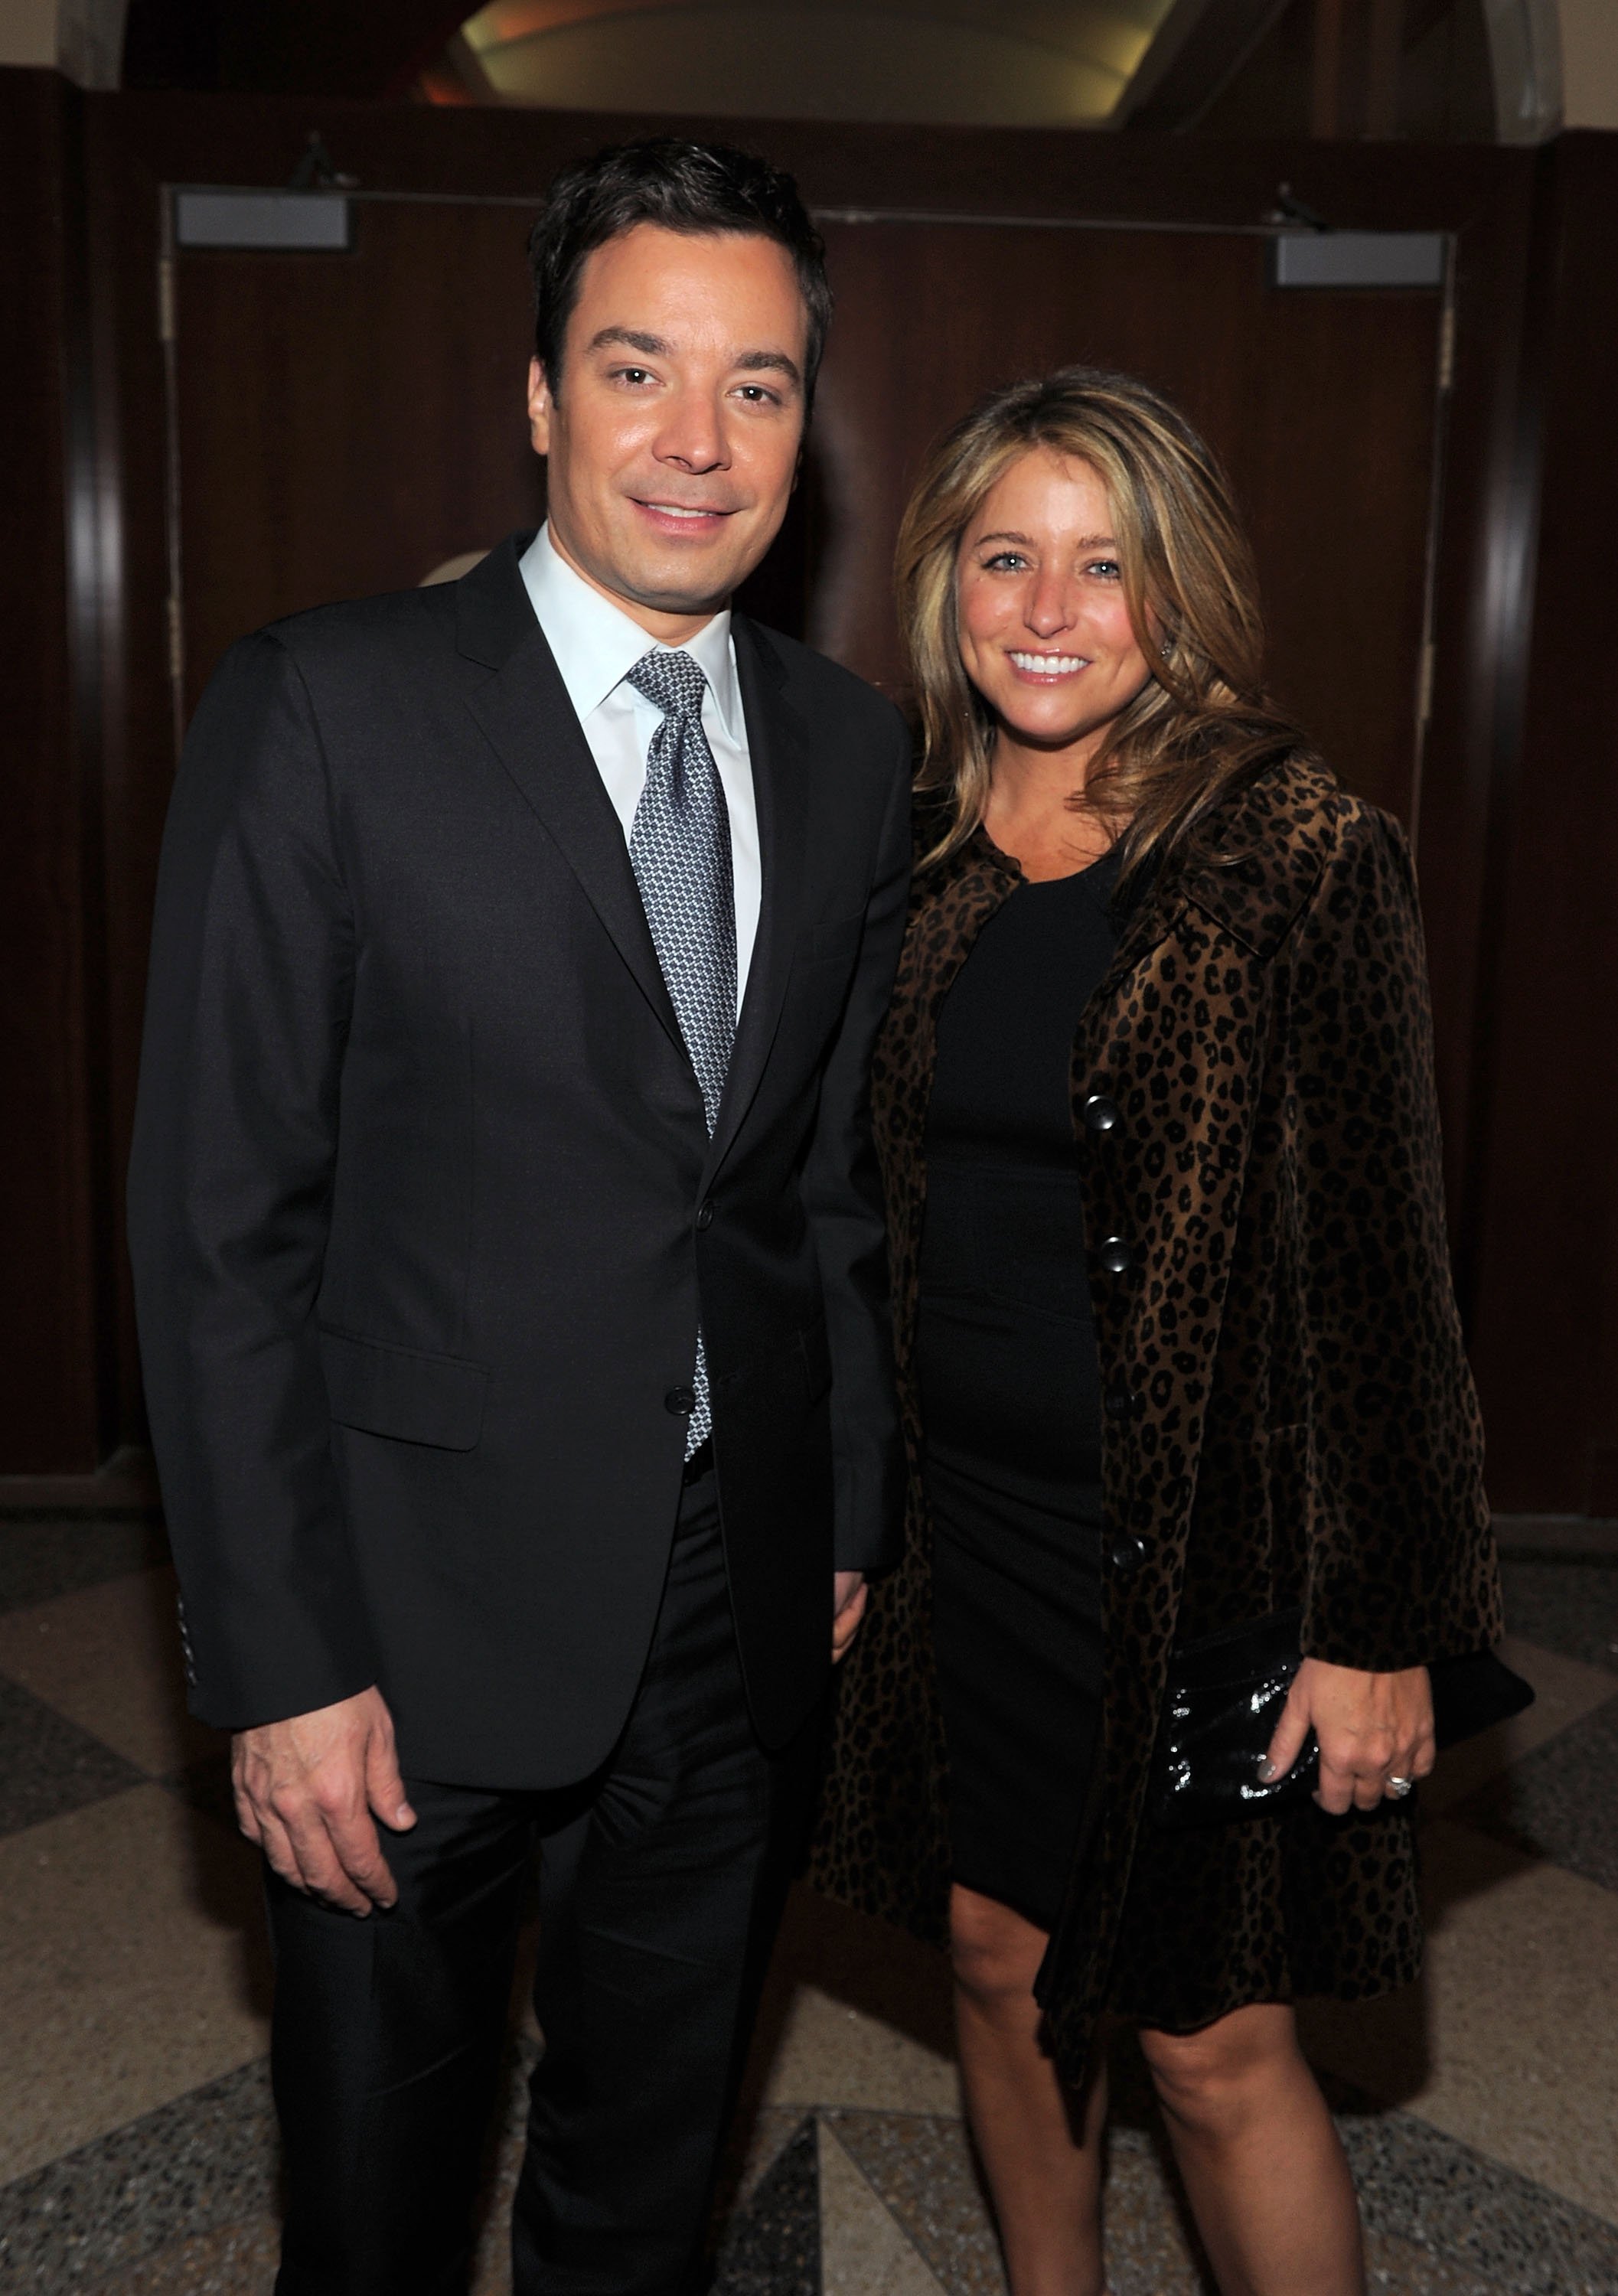 Jimmy Fallon and Nancy Juvonen attend Food Bank For New York City's Annual Can-Do Awards Gala on April 7, 2011 in New York. | Source: Getty Images